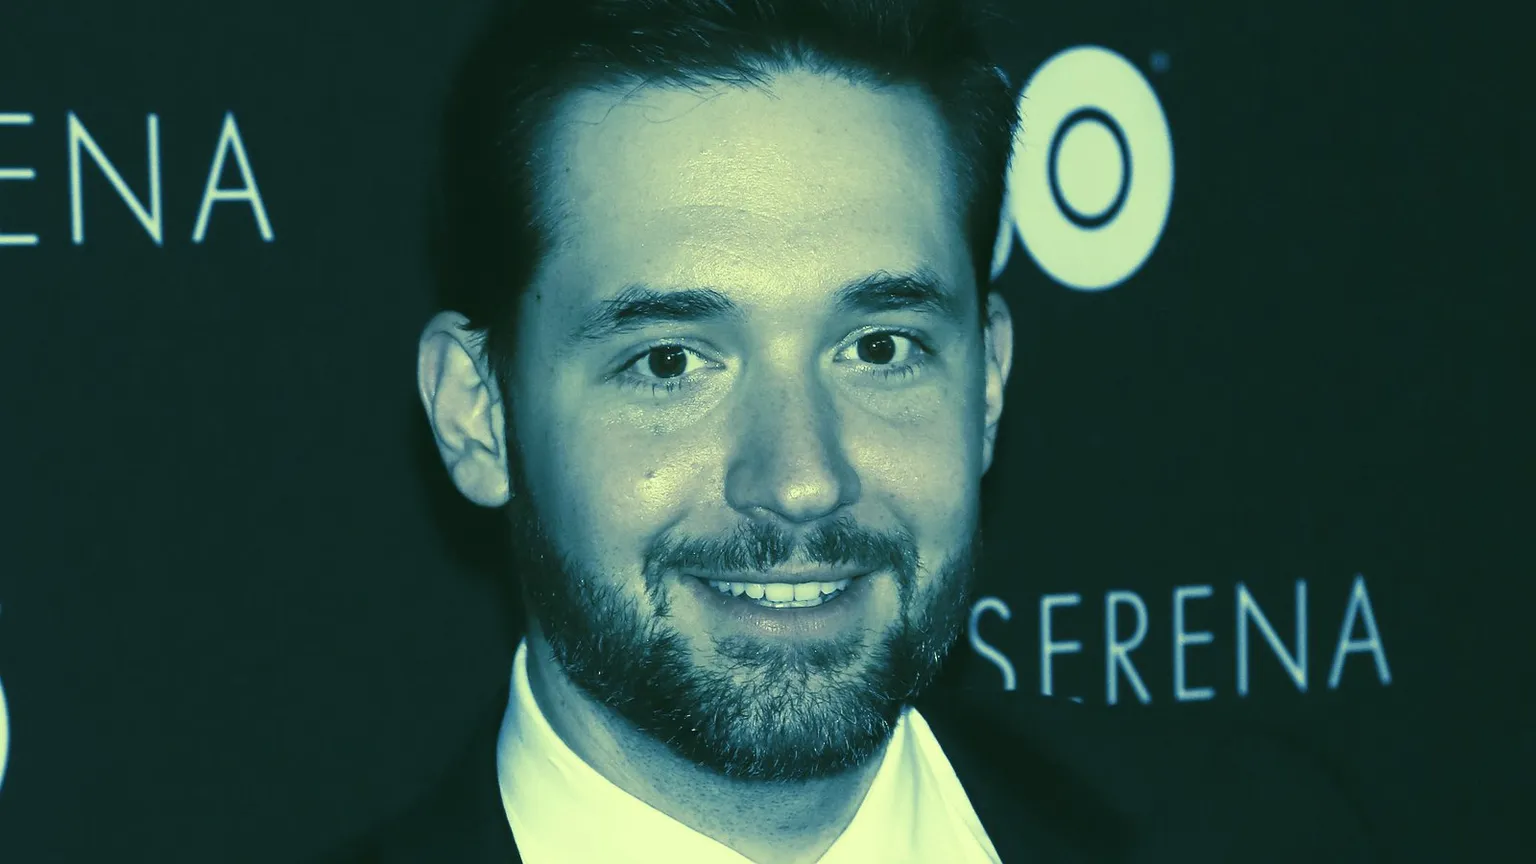 Reddit co-founder discusses his crypto holdings. Image: Shutterstock